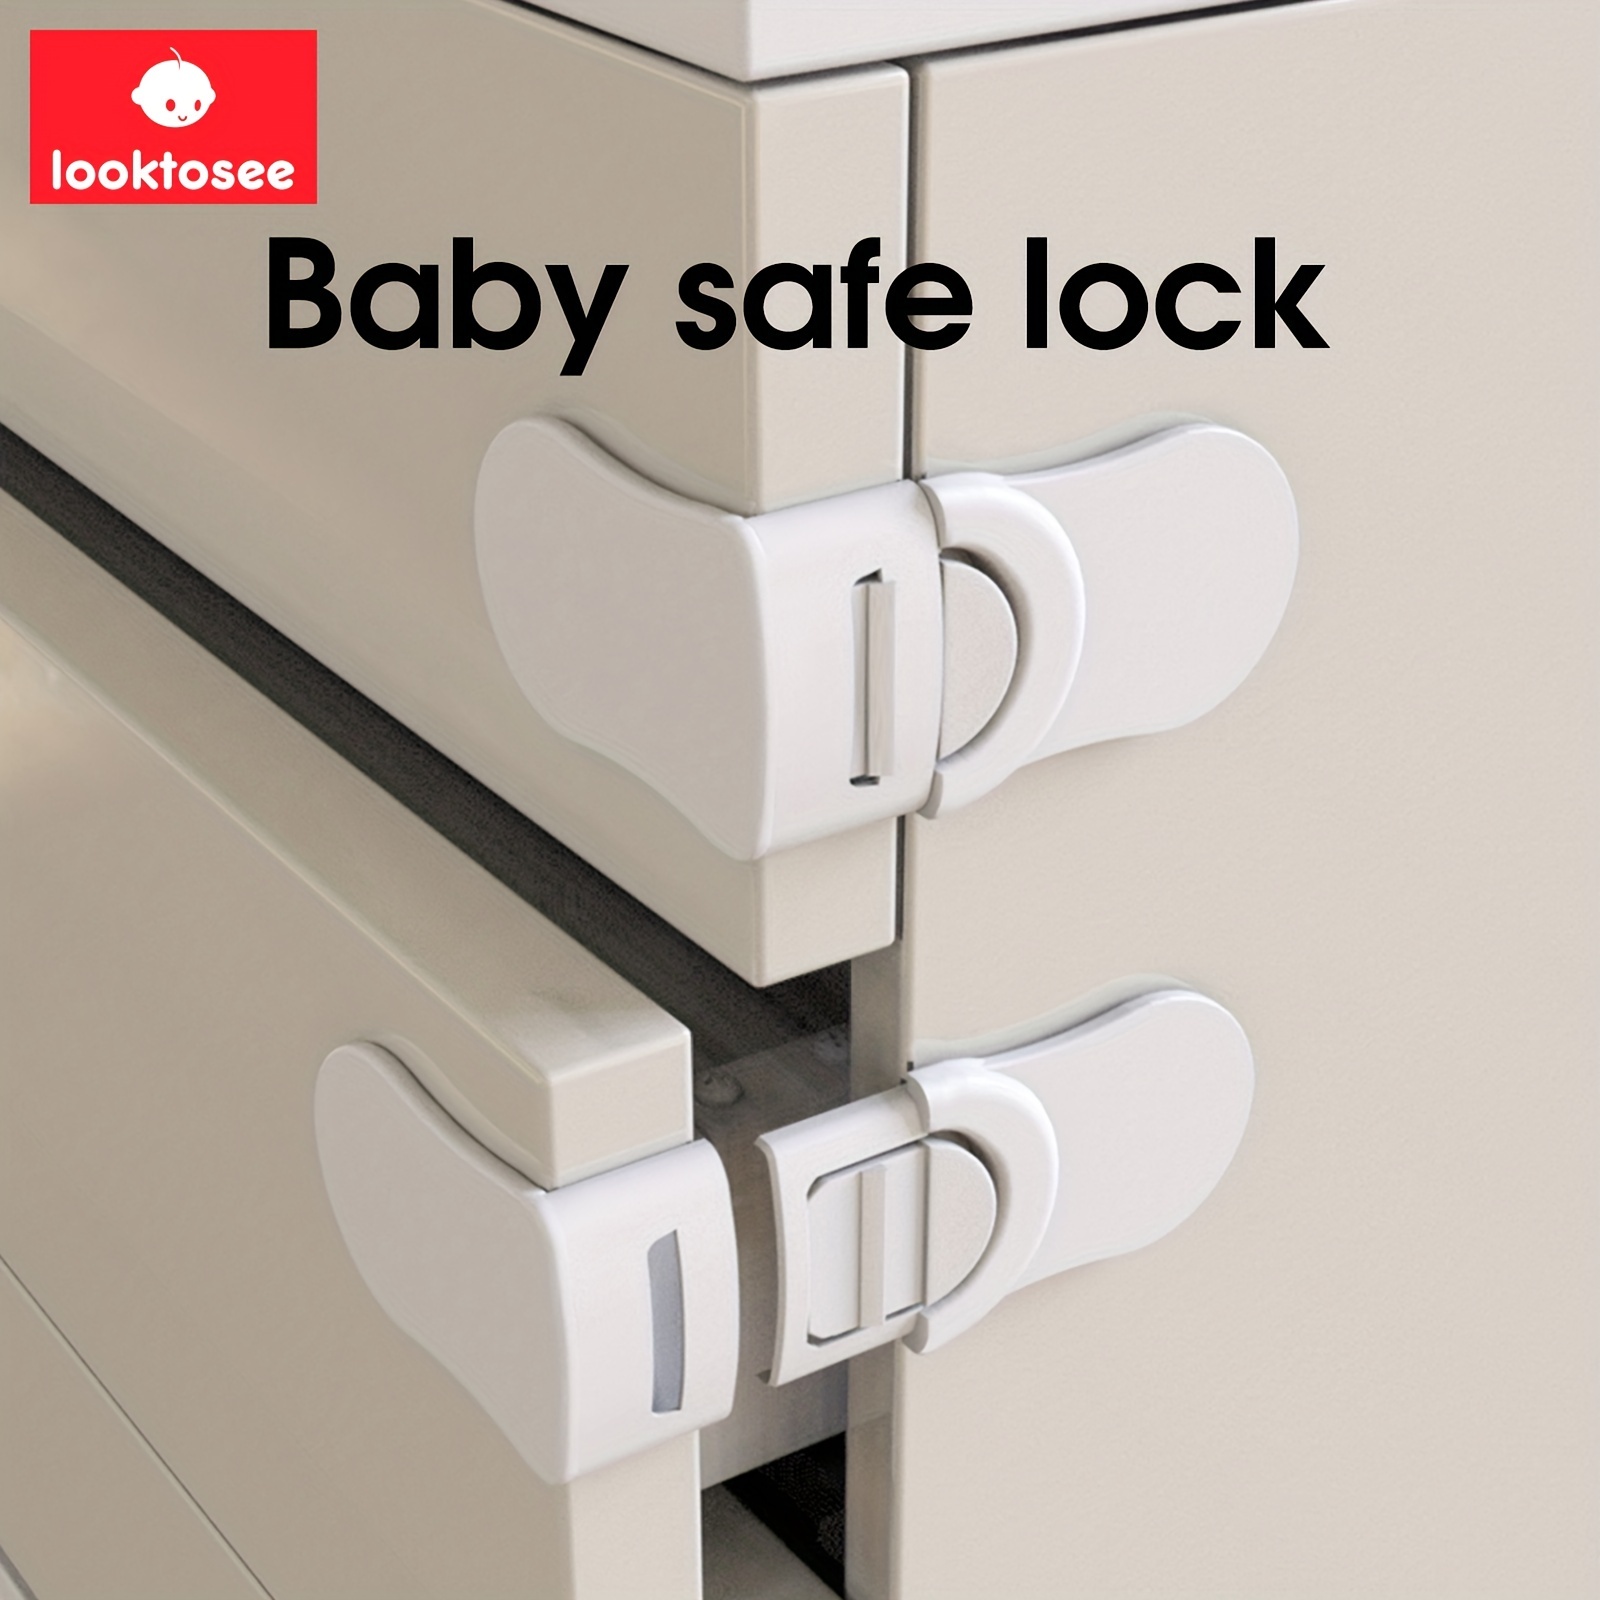 6-Pack Child Proof Locks for Cabinet Doors, Drawers, Fridge, Toilet Seat,  Dishwasher, Trash Can, Cupboard - 3M - No Drilling - Baby Proofing Safety  Cabinet Lock